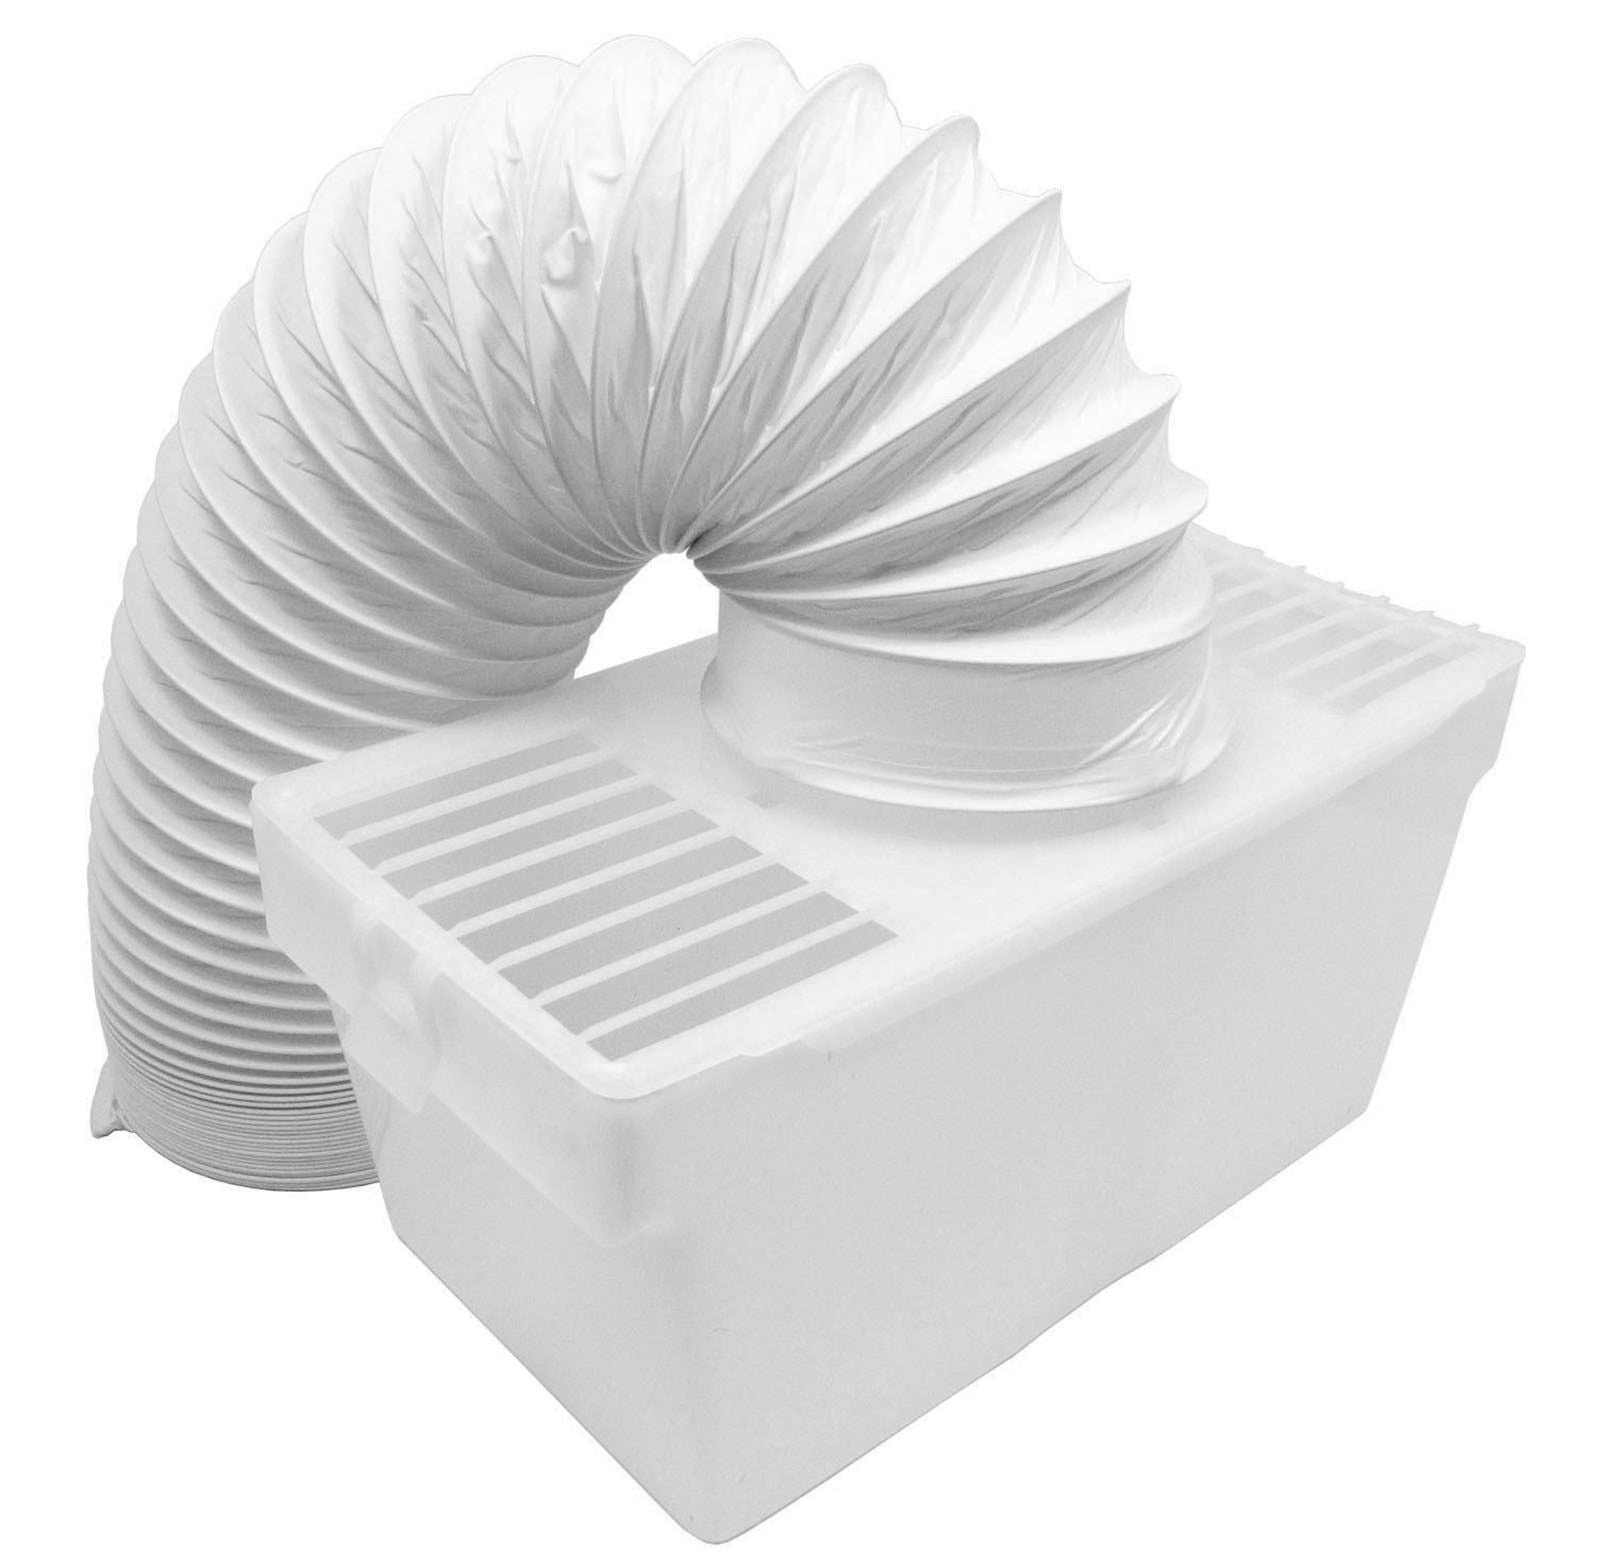 Universal Vented Tumble Dryer (4" / 100mm Diameter) Condenser Vent Box & Hose Kit with Screw Clip